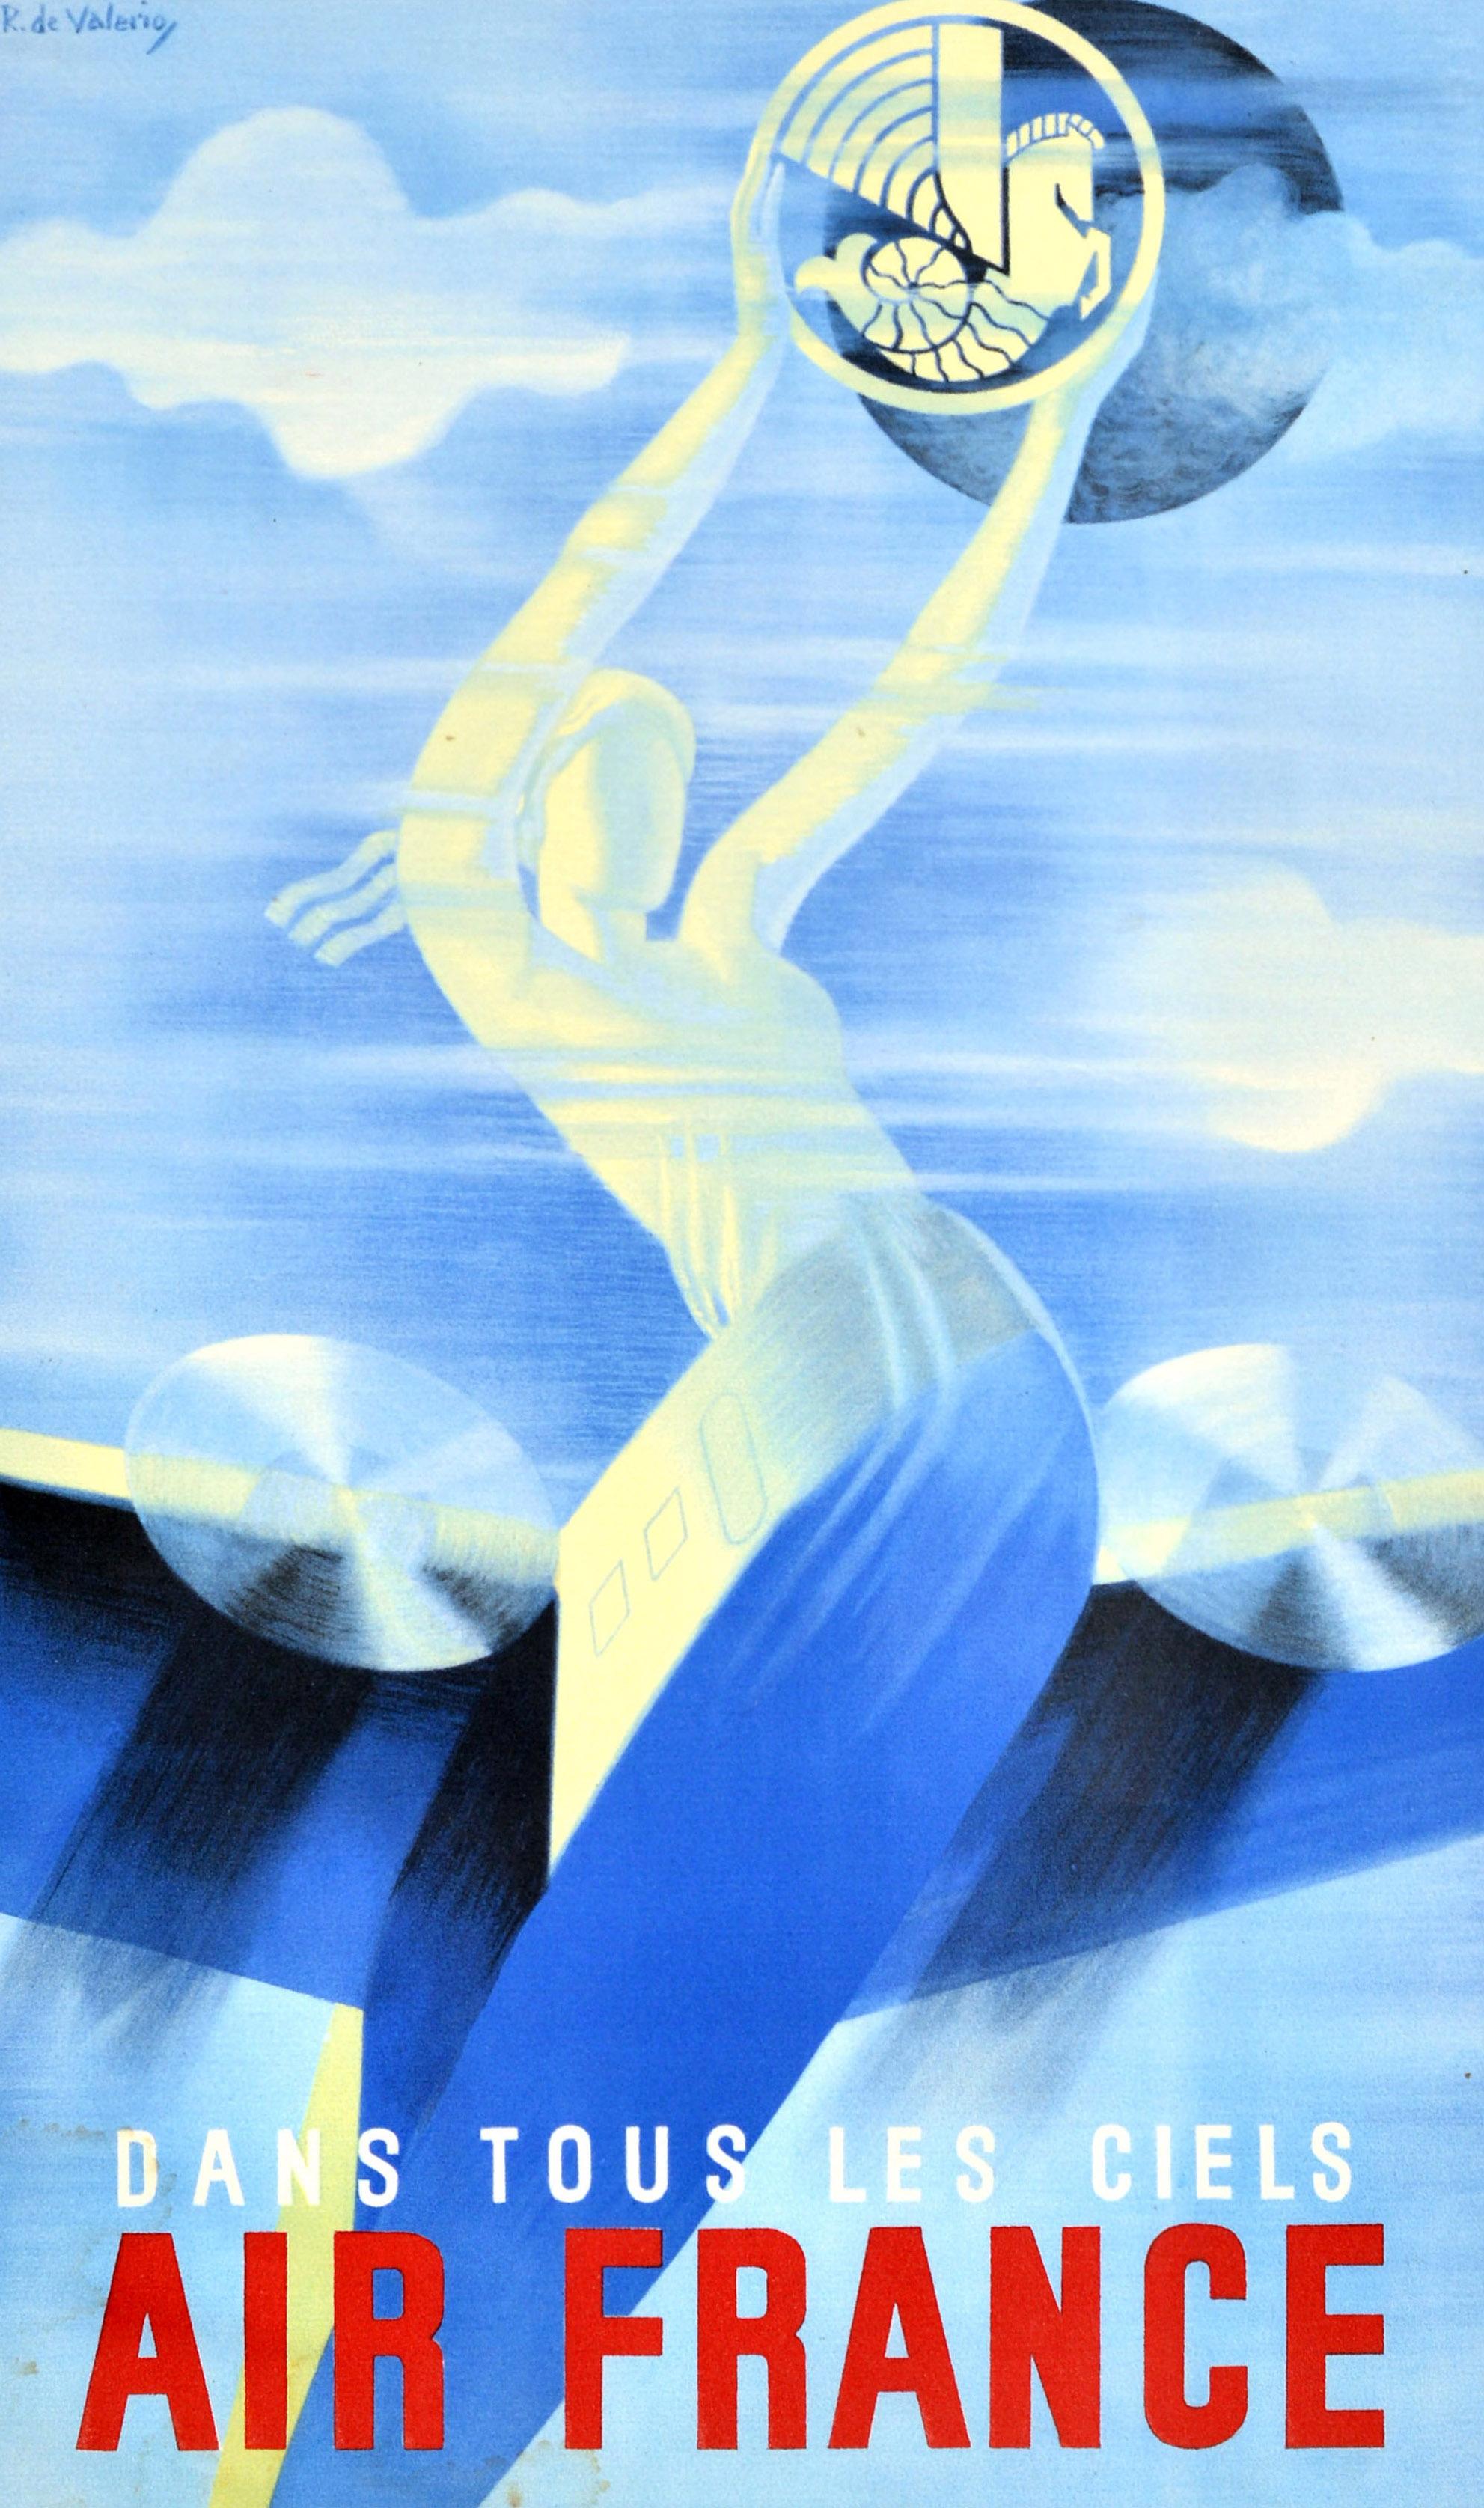 Original vintage travel poster - Dans Tous Les Ciels Air France / In All Skies - featuring a stunning Art Deco design by Roger de Valerio (1886-1951) depicting a propeller plane flying at speed with a lady at the front, like a ship's figurehead,